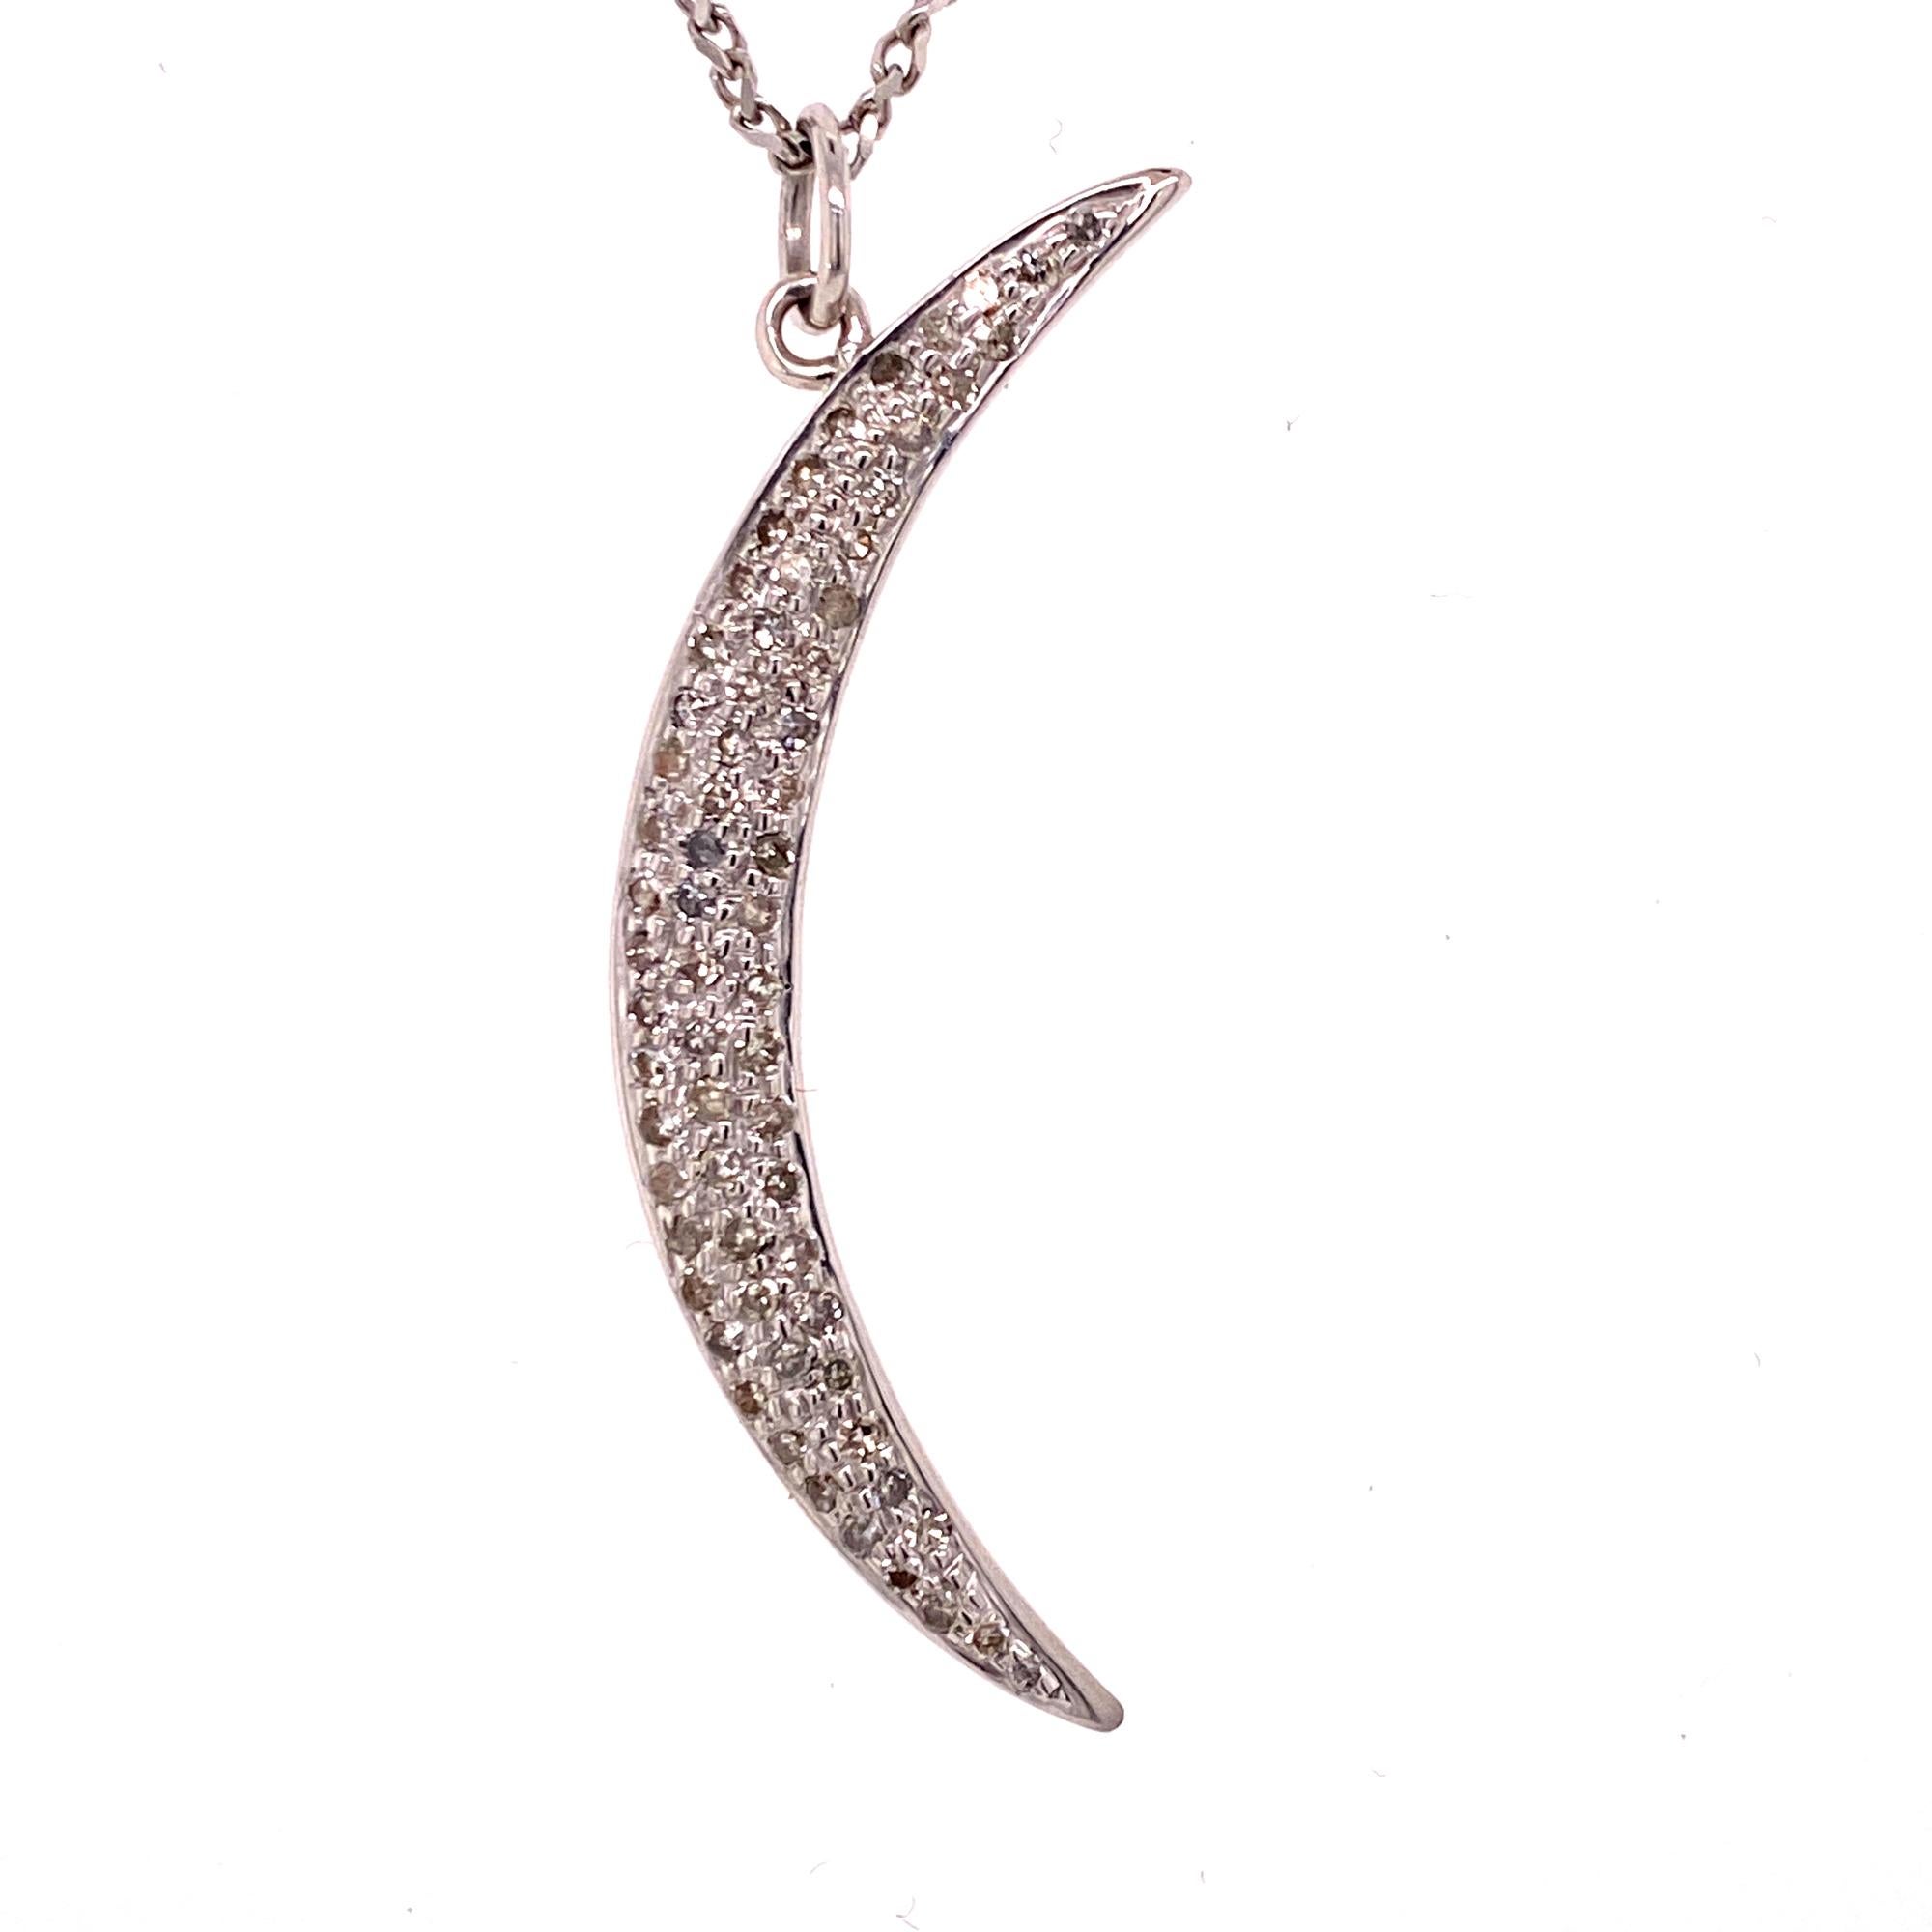 Stylish crescent moon pendant fashioned in 18 karat white gold. The diamond pendant features round briliant cut diamonds weighing .50 ctw. The pendant measures 1.5 x .20 inches and the chain measures 16 inches in length. 